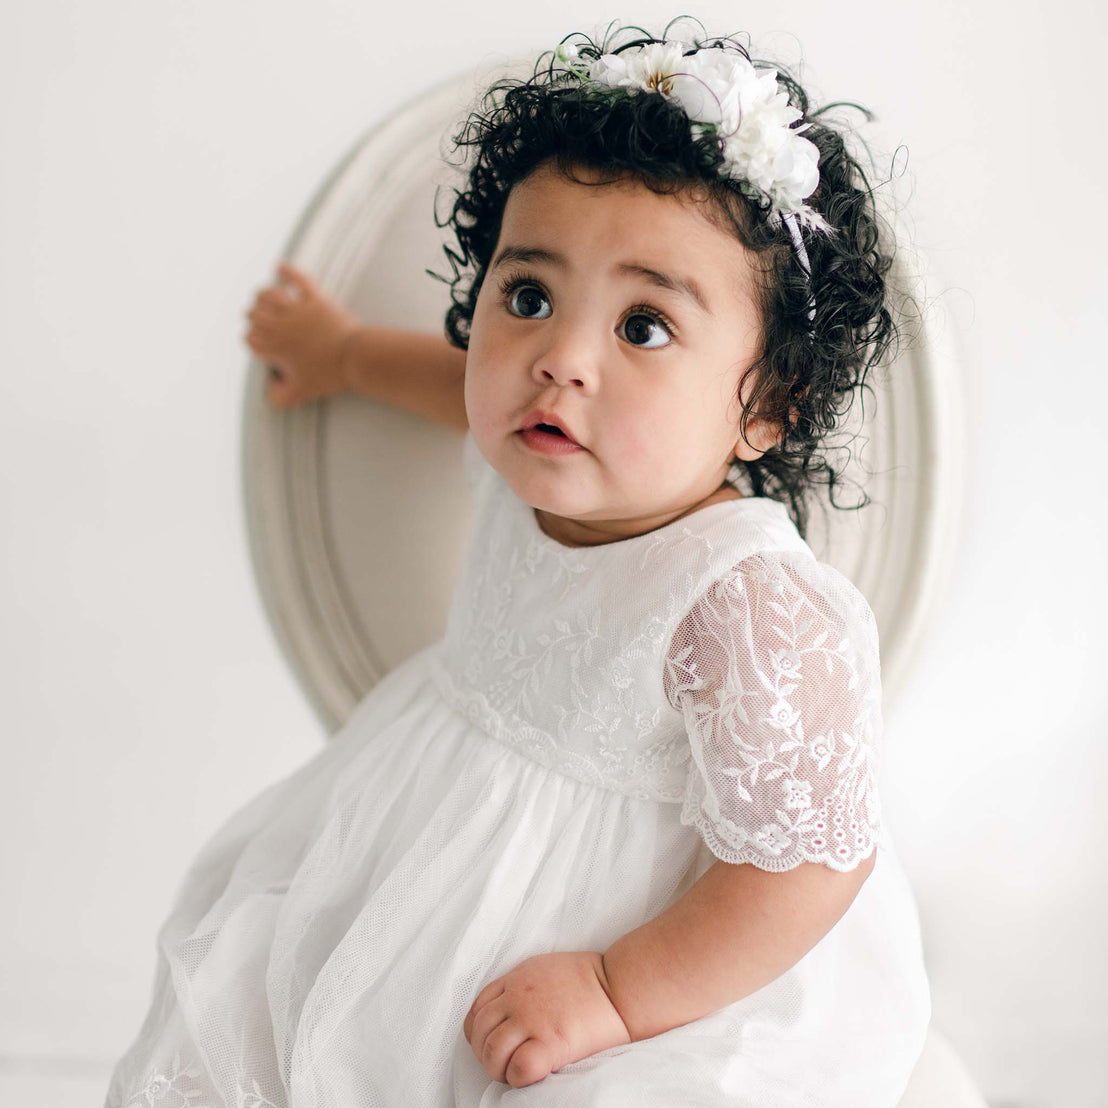 A toddler with curly hair and a floral headband wears an Ella Romper Dress made of floral embroidered netting lace, sitting in front of a round white backdrop, looking upwards with wide eyes.